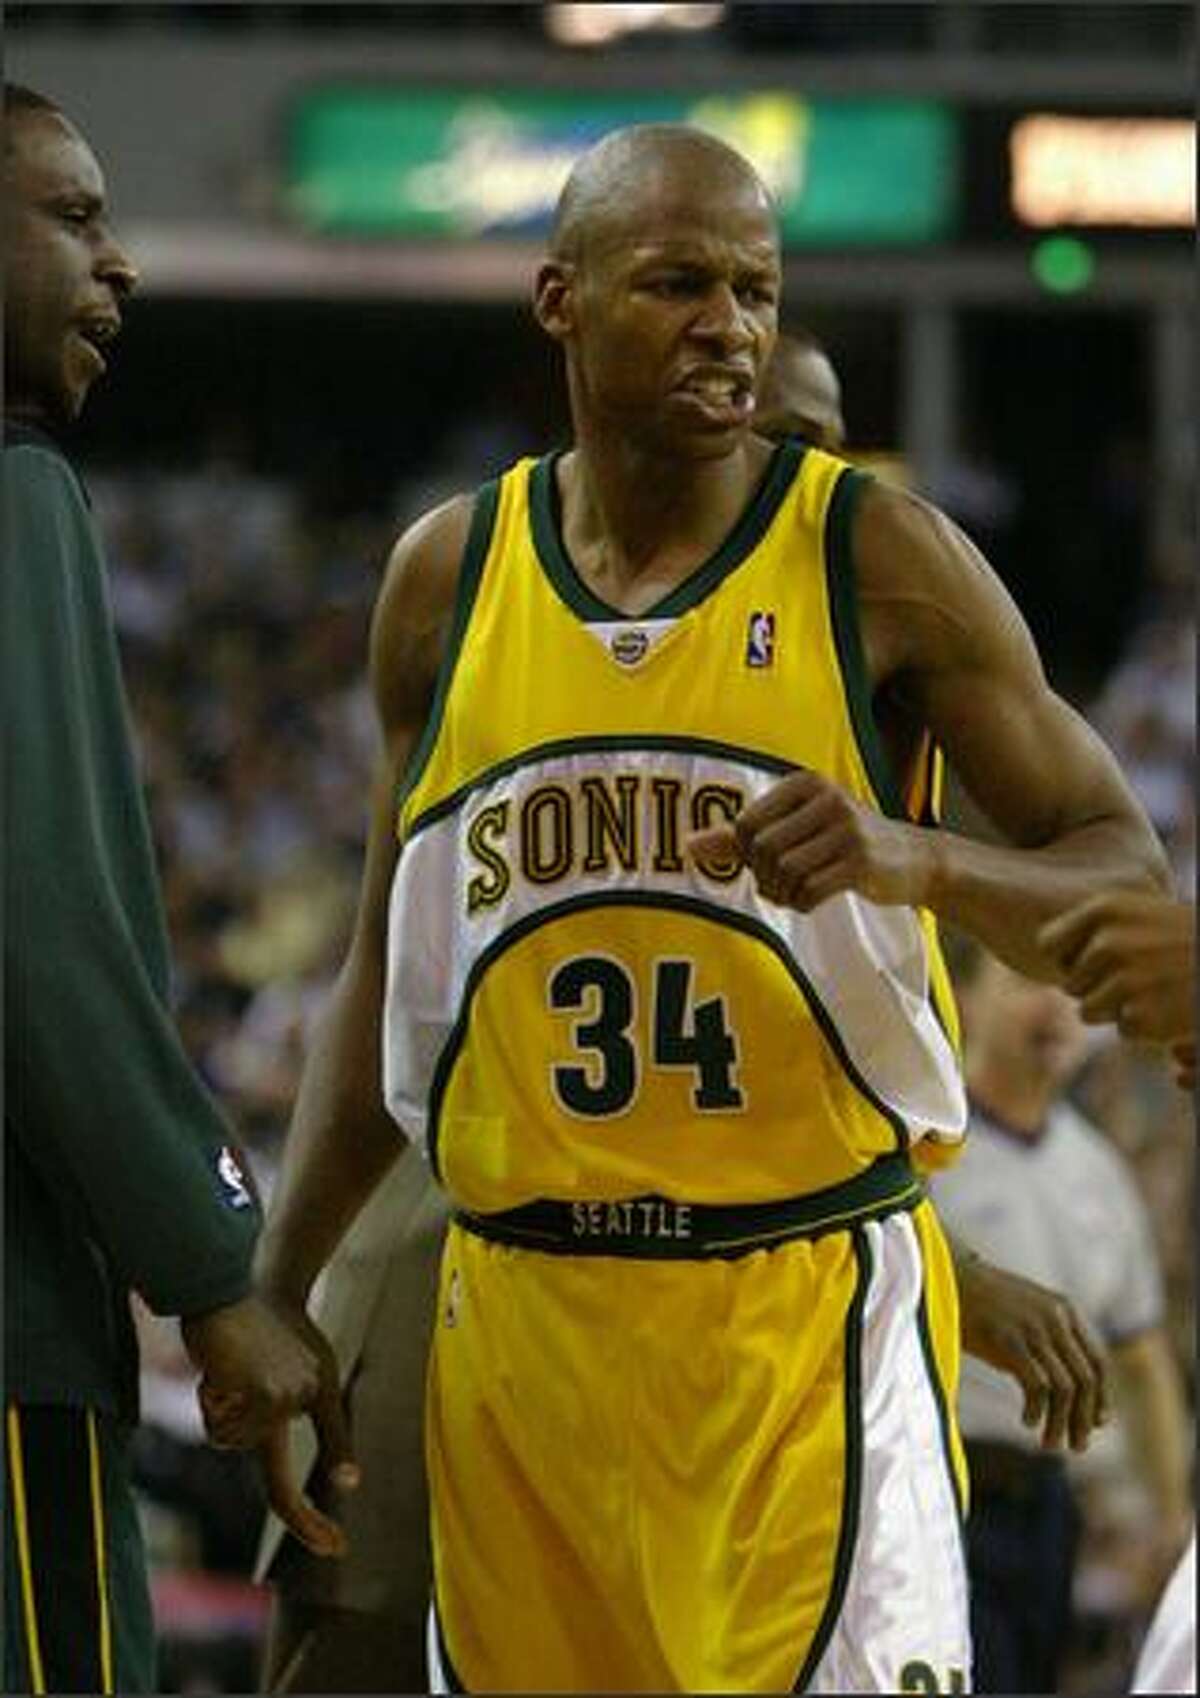 Ray Allen reacts as Seattle starts to pull ahead against Sacramento in Game 4.